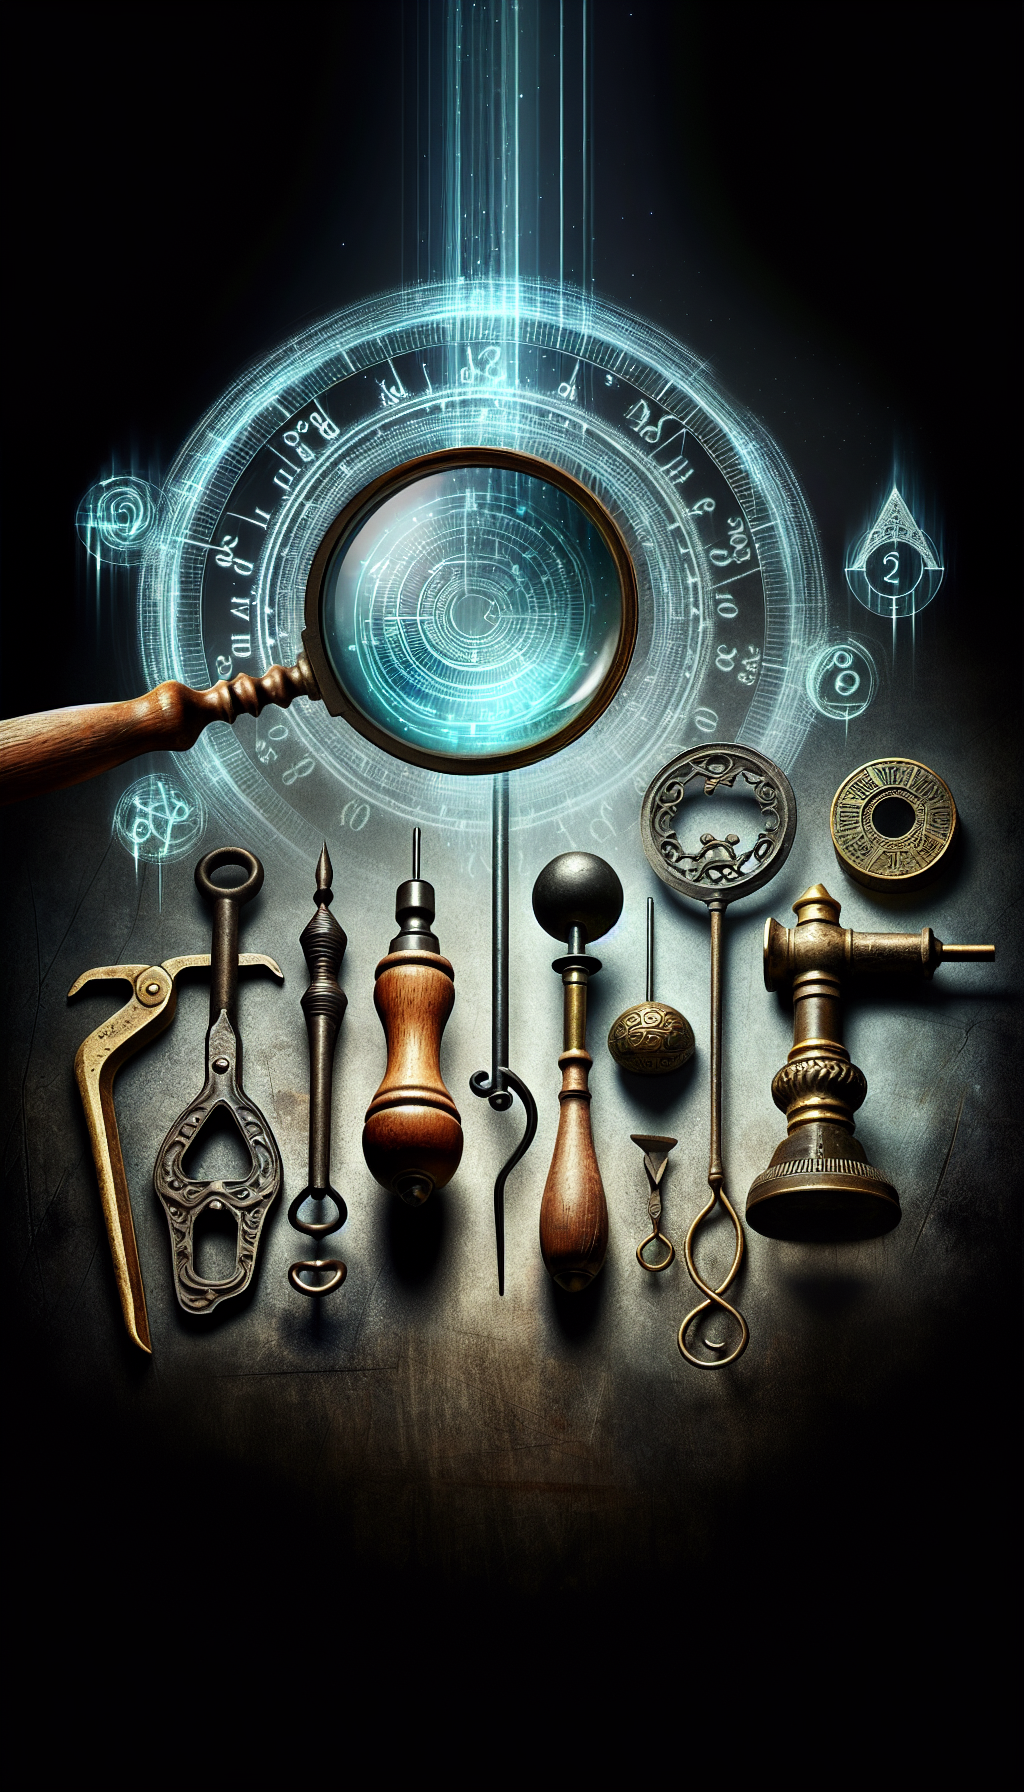 An aged magnifying glass hovers over a medley of shadowy antique tools – a wooden-handled auger, a brass plumb bob, and an intricate, wrought-iron gimlet. Translucent time rings and dates echo around them, while an ethereal watermark symbol, unique to each tool, glows softly for authenticity, exuding a mysterious aura that hints at their peculiar origins and craftsmanship.